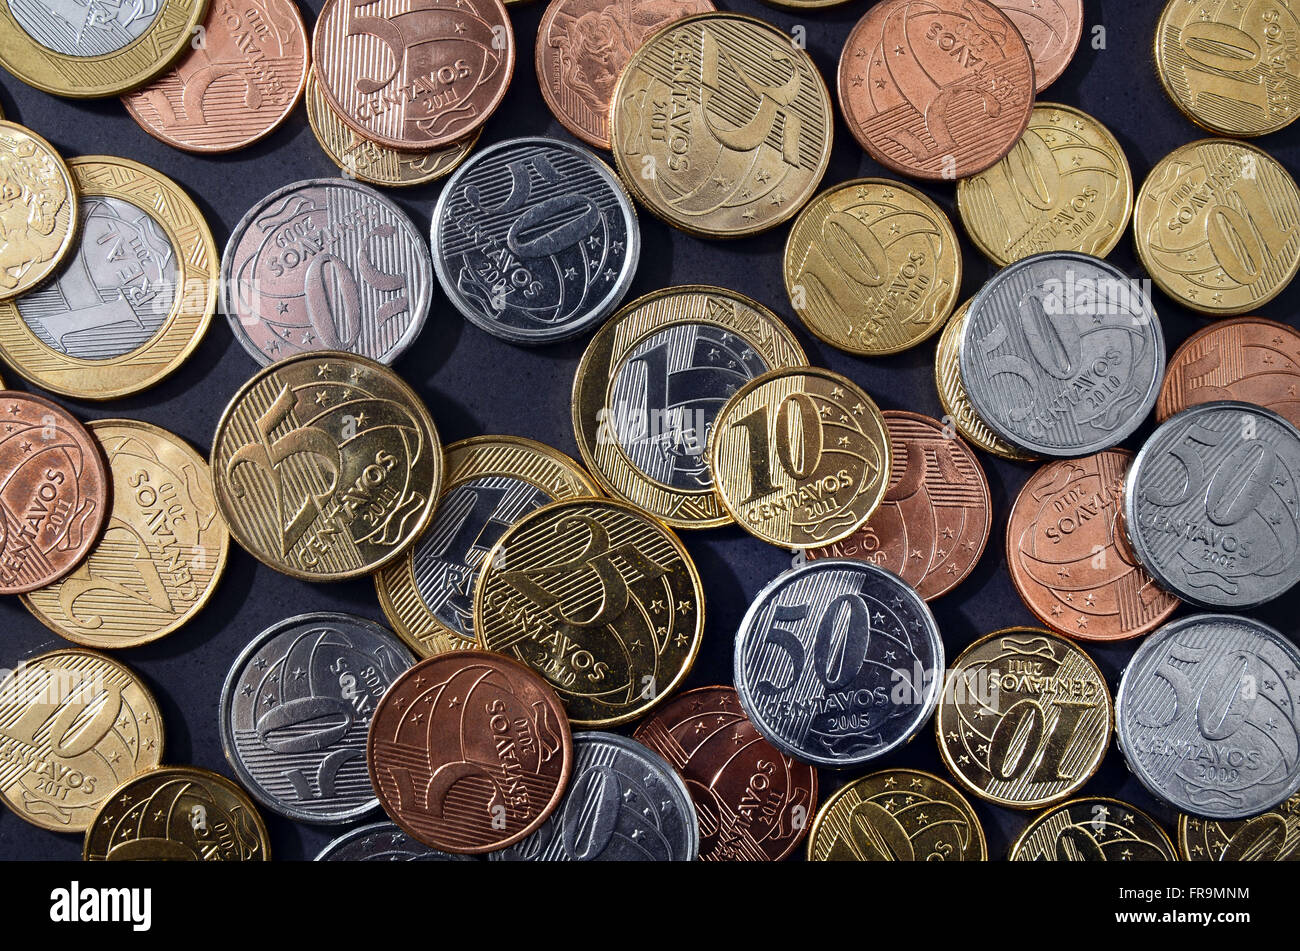 Real coins in circulation in the country Stock Photo